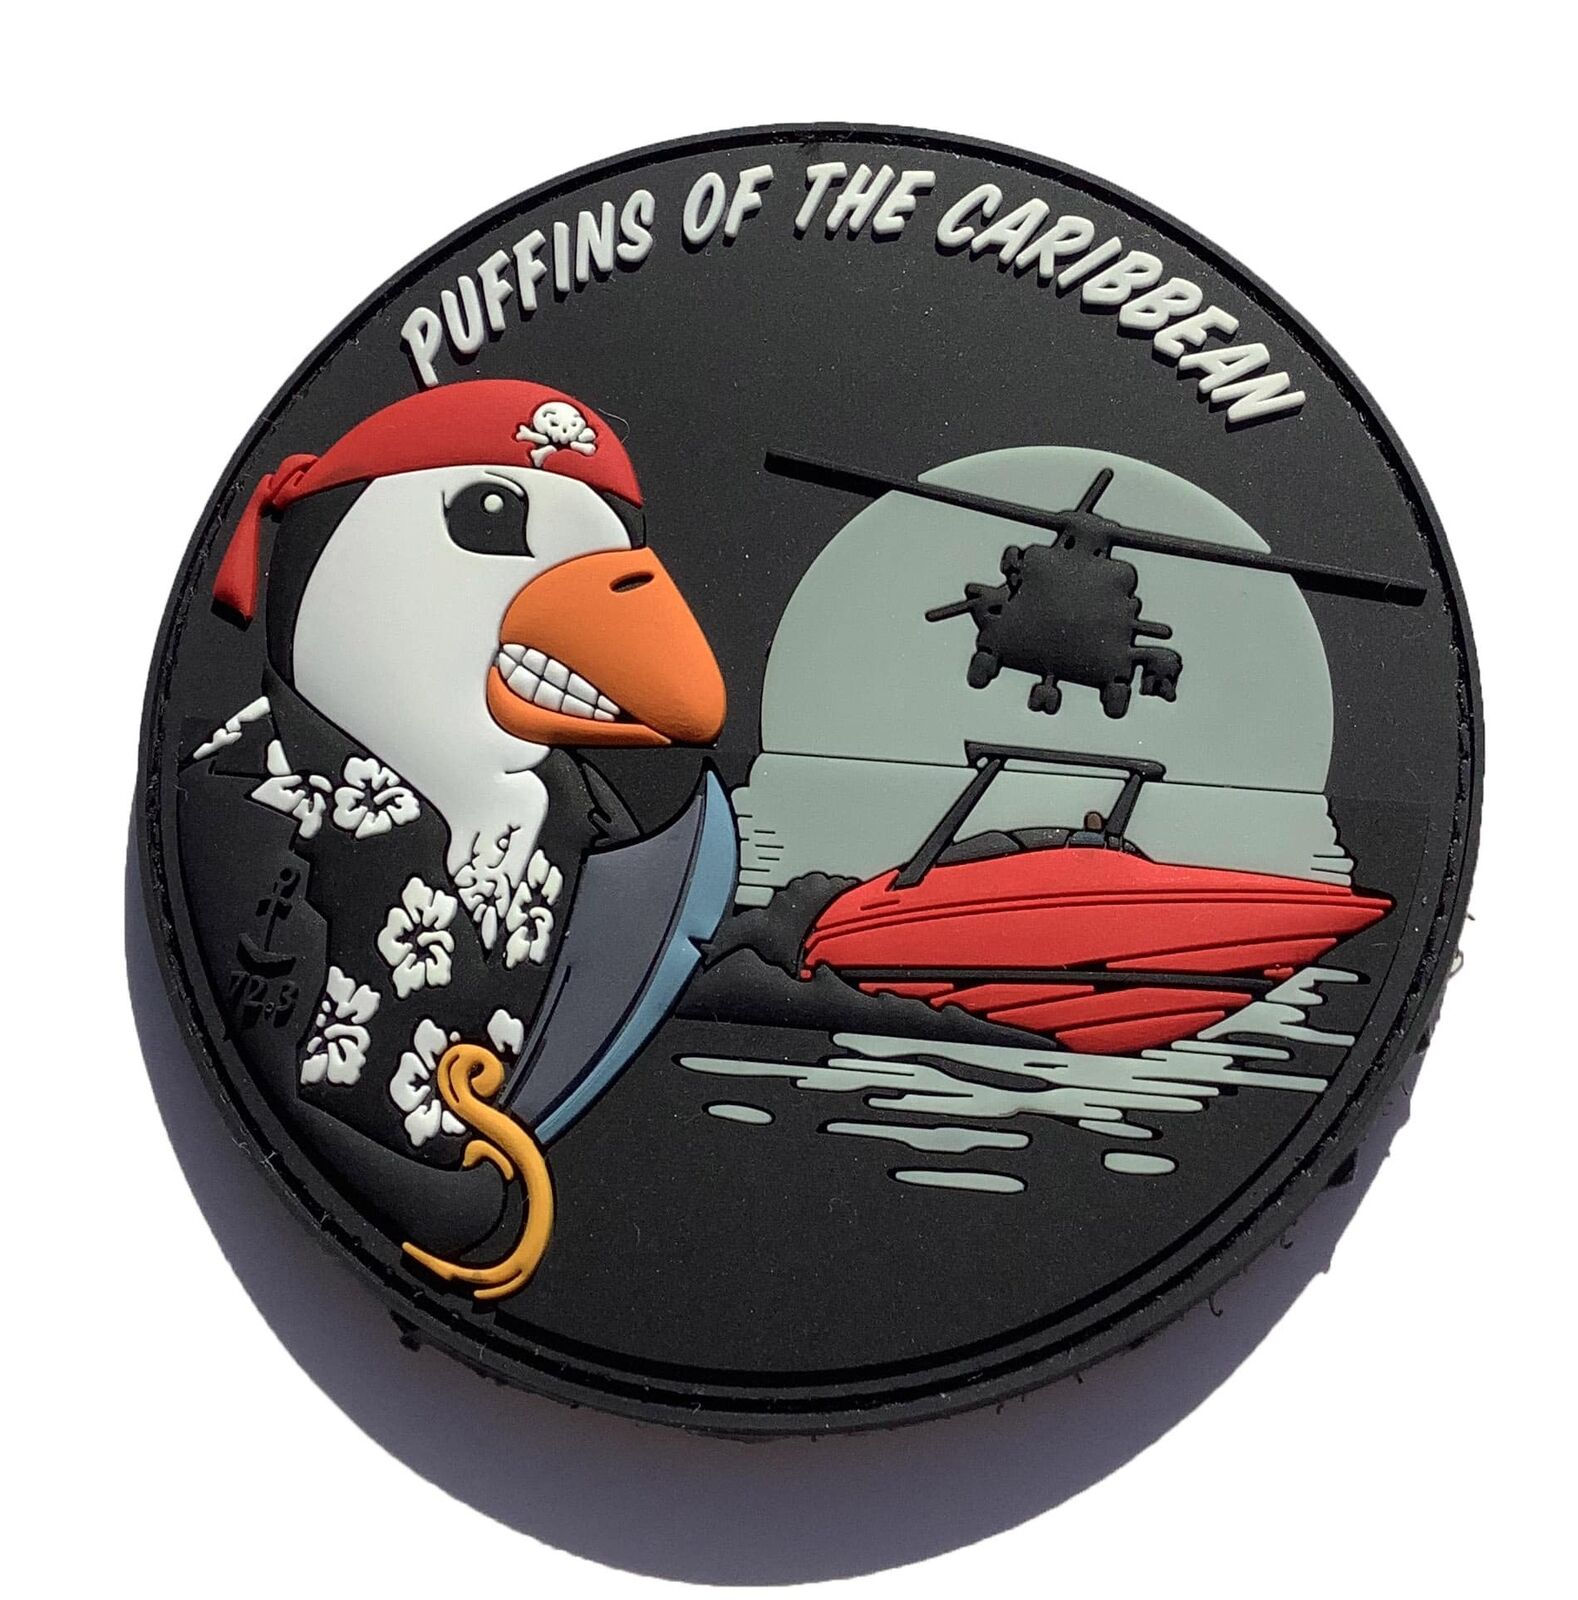 HSM-72 Puffins of the Caribbean Squadron Patch – Hook and Loop